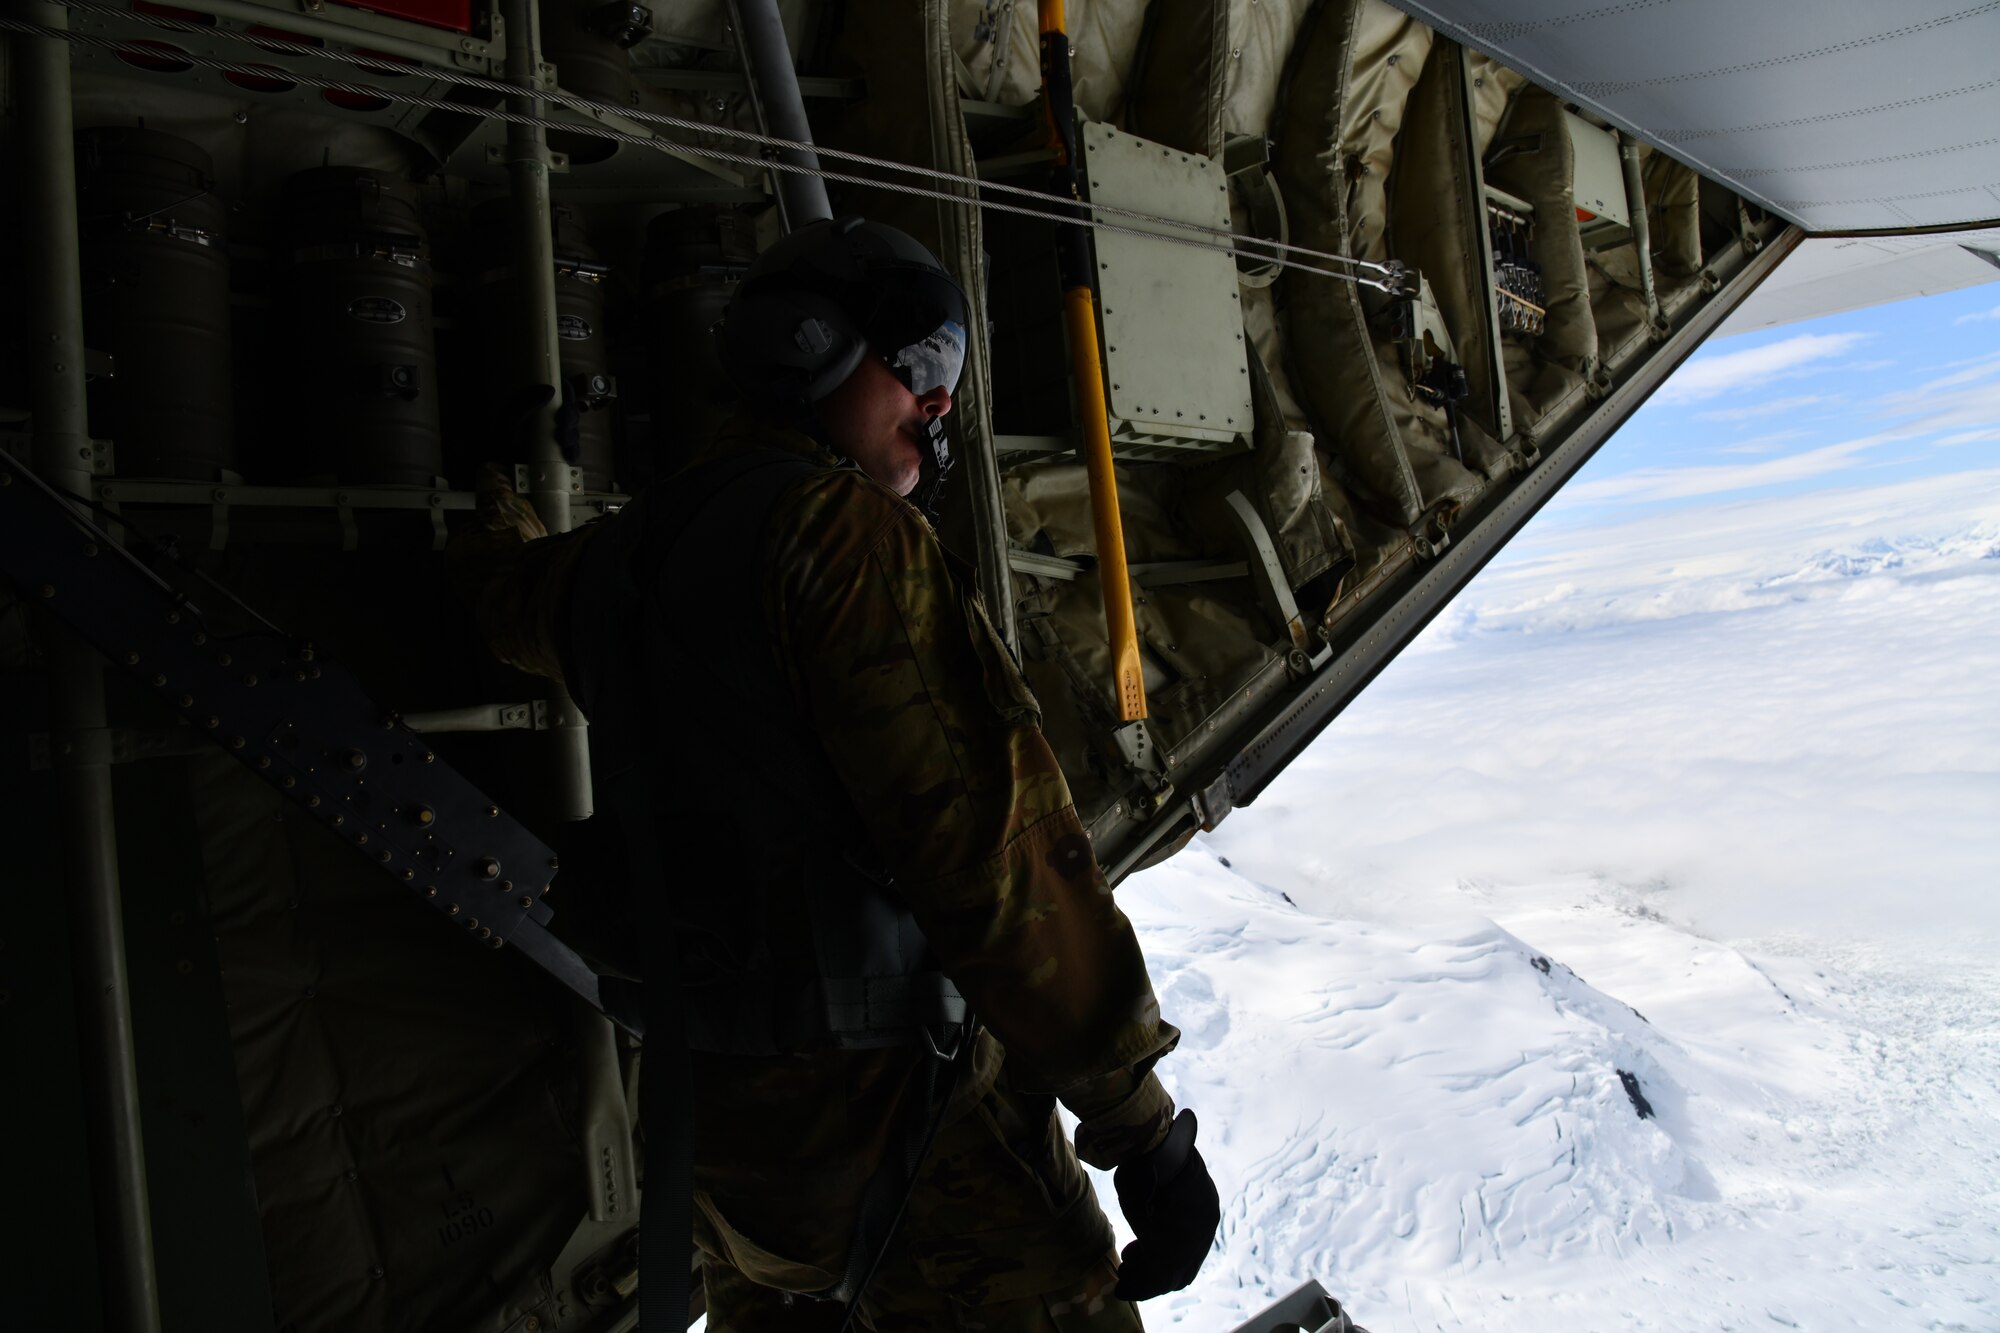 Tech. Sgt. Jacob Fountain, 815th Airlift Squadron loadmaster, holds on after opening the cargo door ramp while the pilots conduct low-level tactical flight training patterns during a training exercise at Joint Base Elmendorf-Richardson, Alaska, July 13-16, 2021. The terrain of the mountain, valleys and along with the colder temperatures provided a different challenge for the low-level flights, which were an effective tactic in training for hostile environments.  (U.S. Air Force photo by Master Sgt. Jessica Kendziorek)